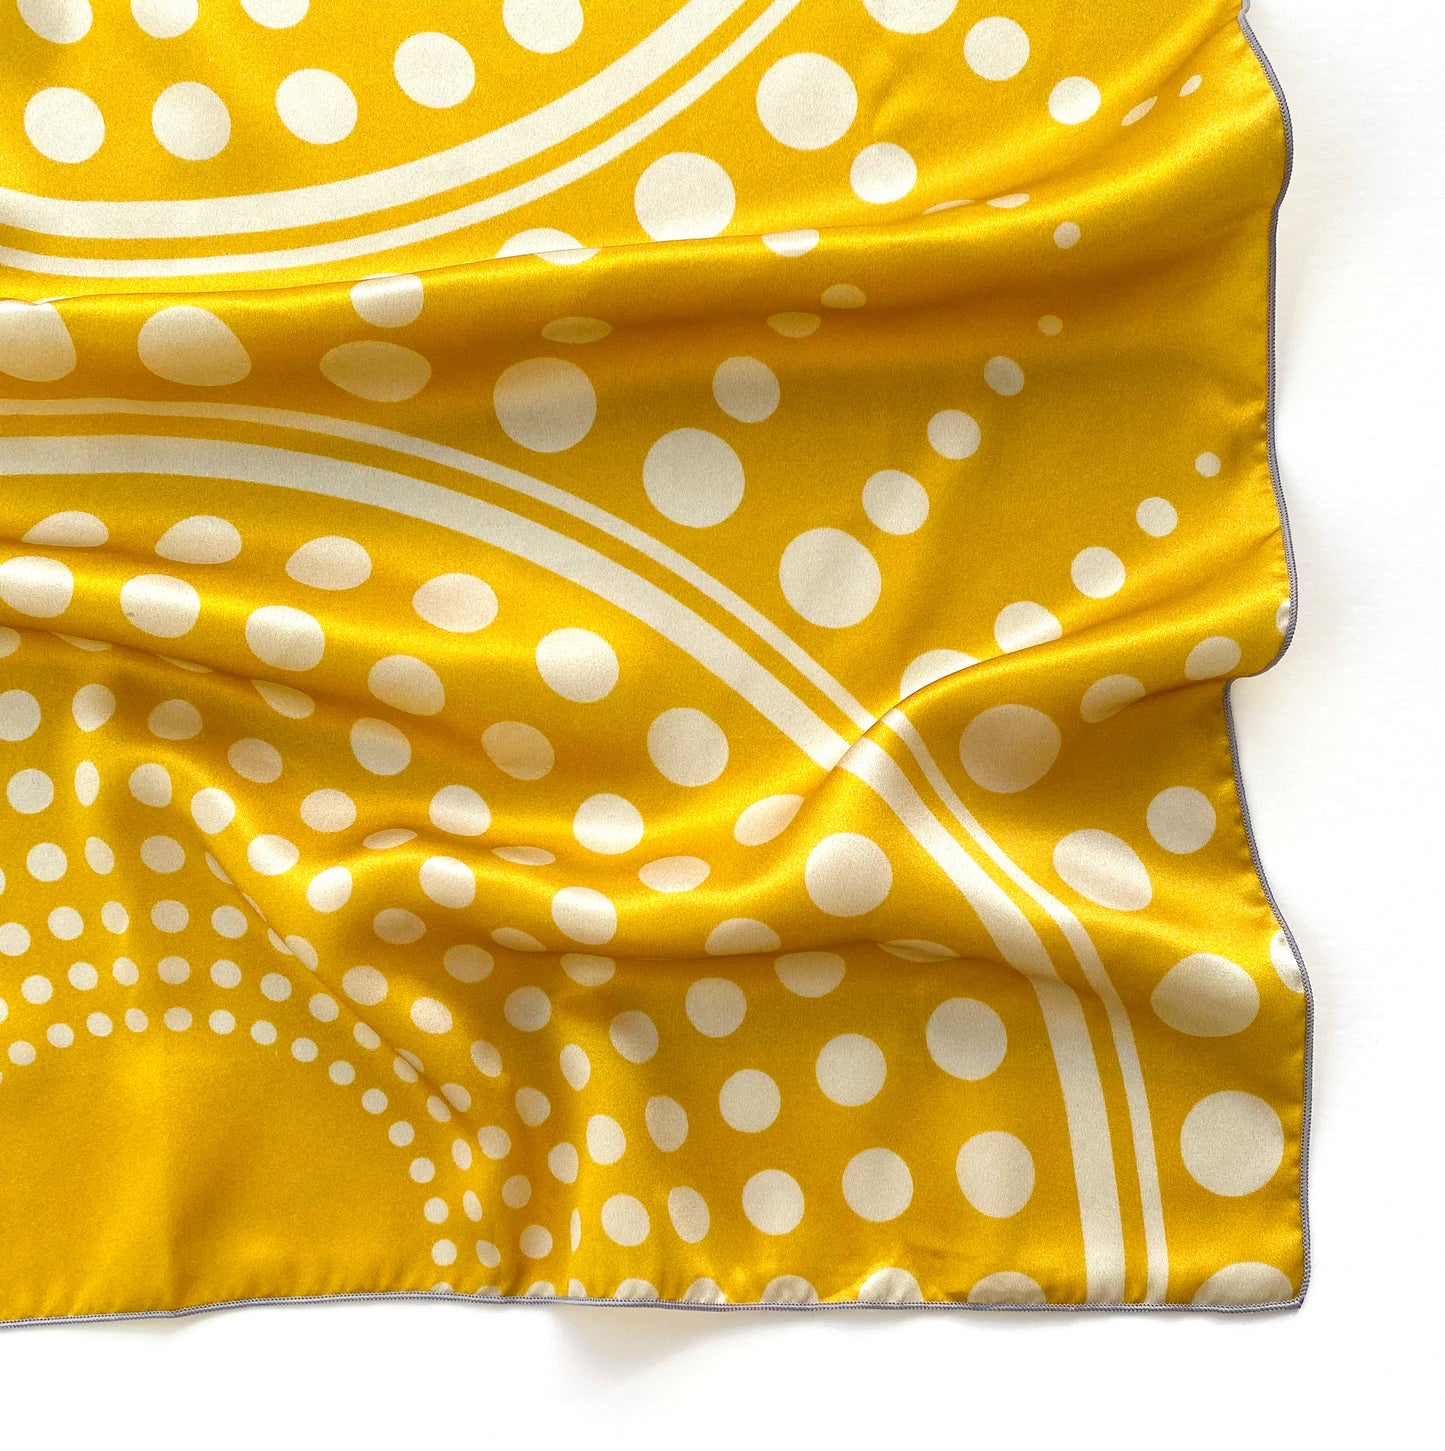 Bring some extra sparkle into your day with this sunshine inspired 100% silk square scarf. Experiment as a bandana or attach it to your purse